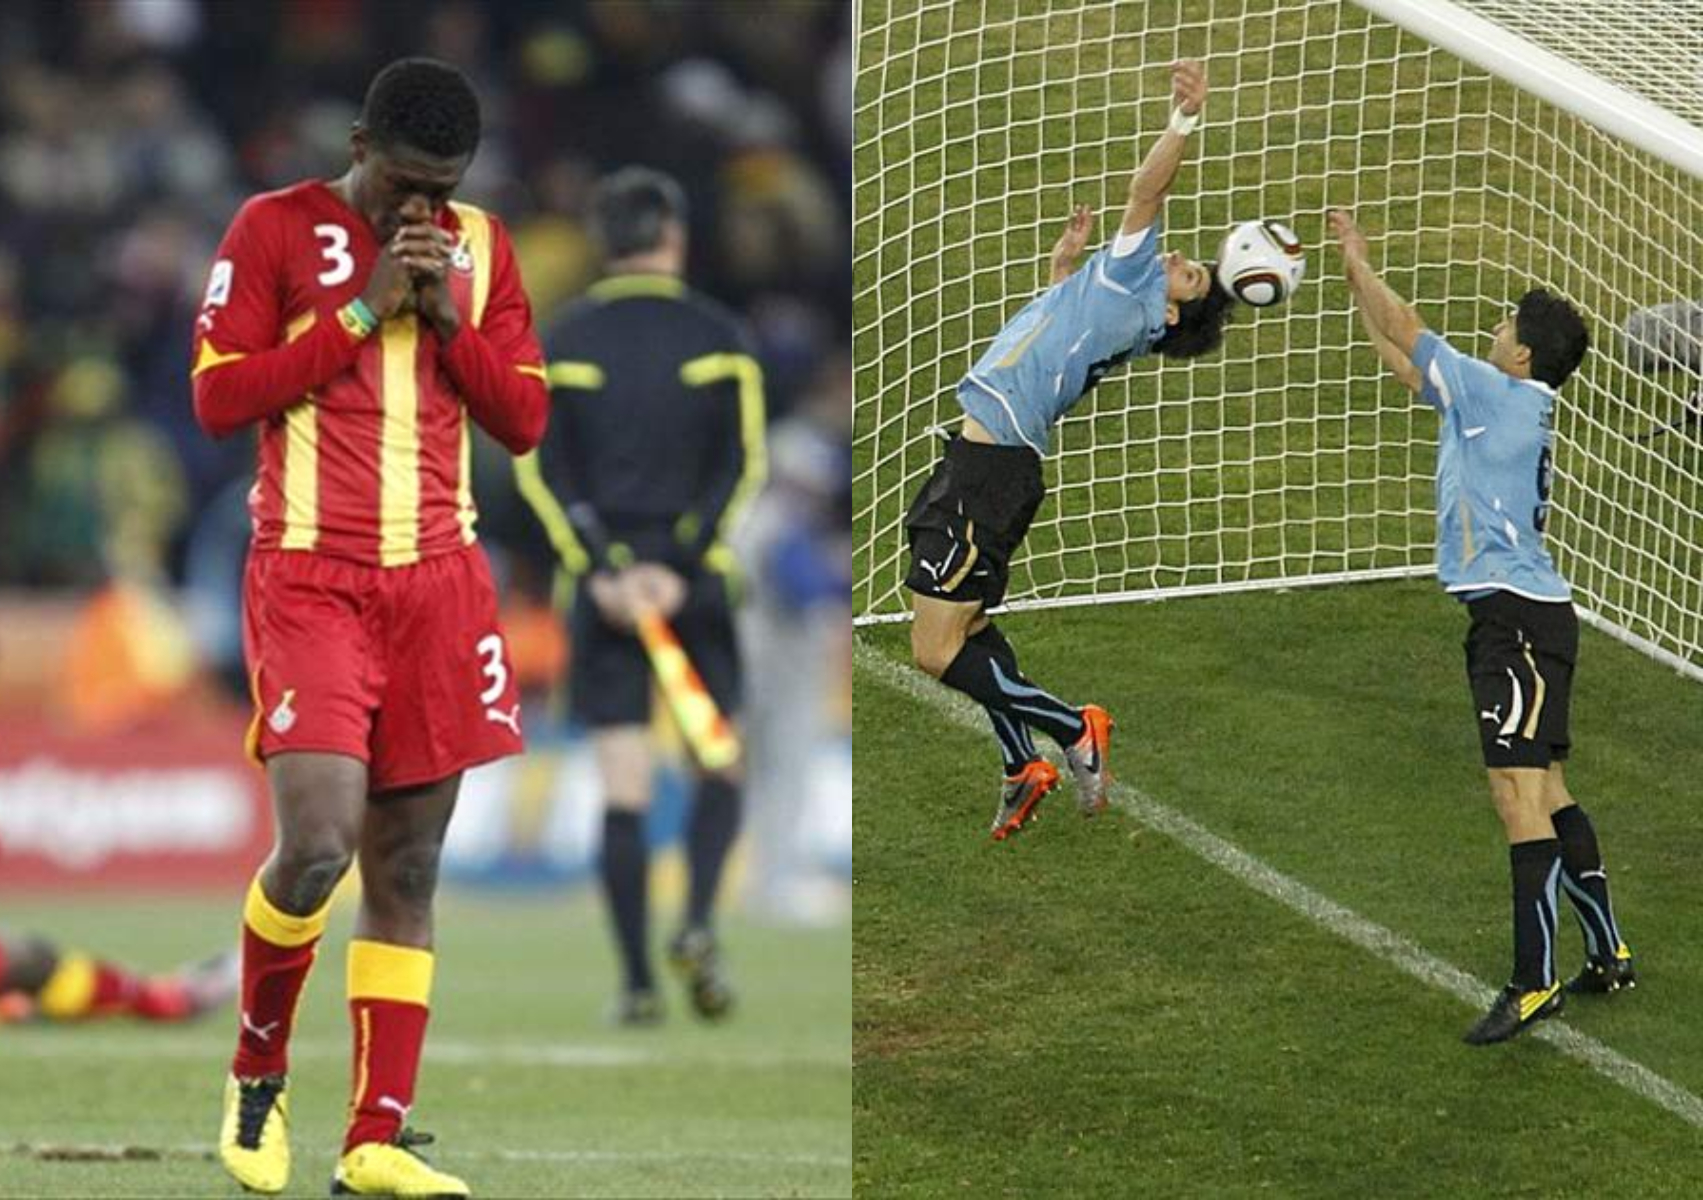 2010 World Cup: Asamoah Gyan wanted to punch Luis Suarez after handball incident